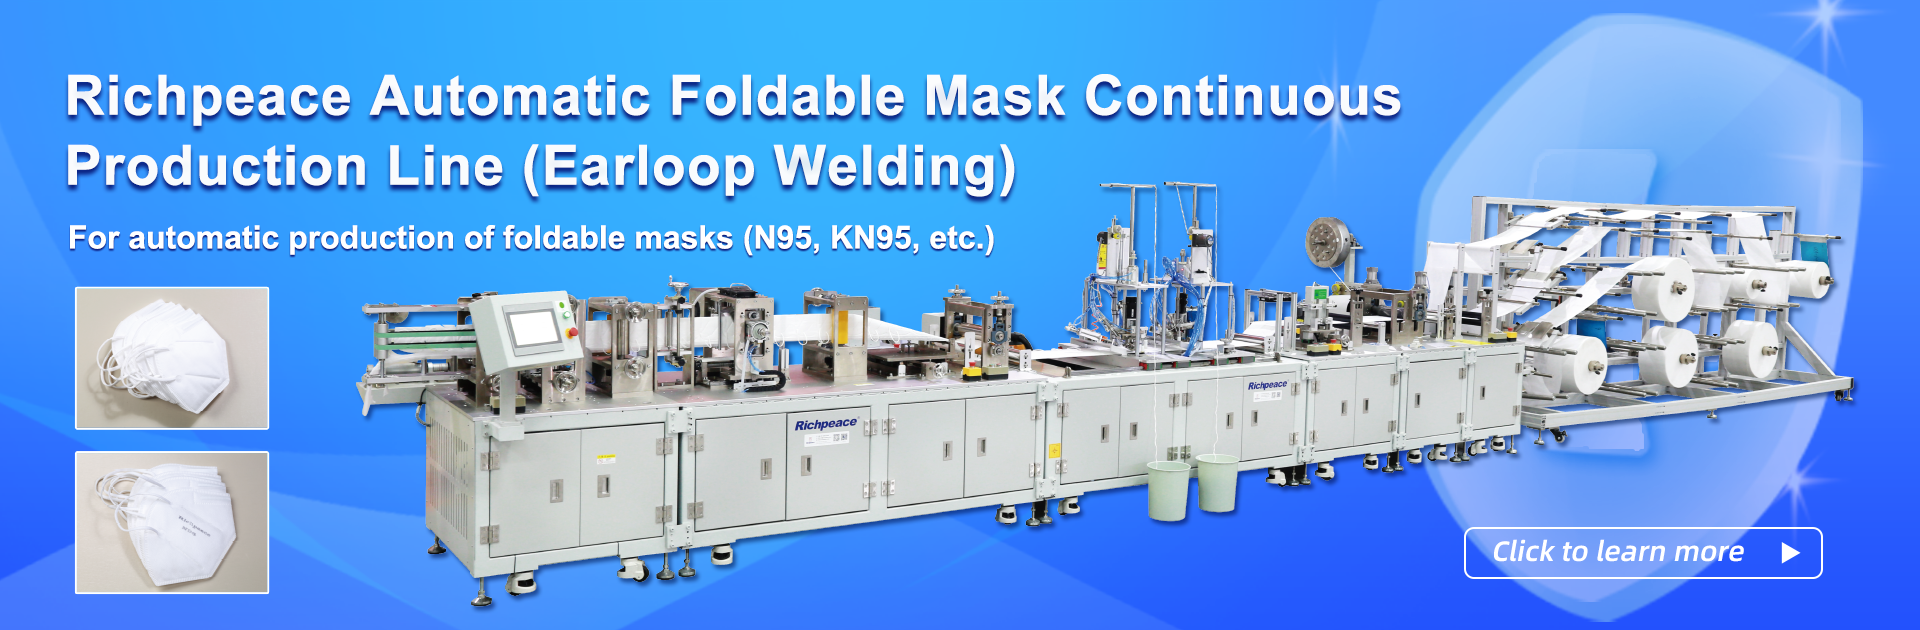 Richpeace Automatic Foldable Mask Continuous Production Line (Earloop Welding)